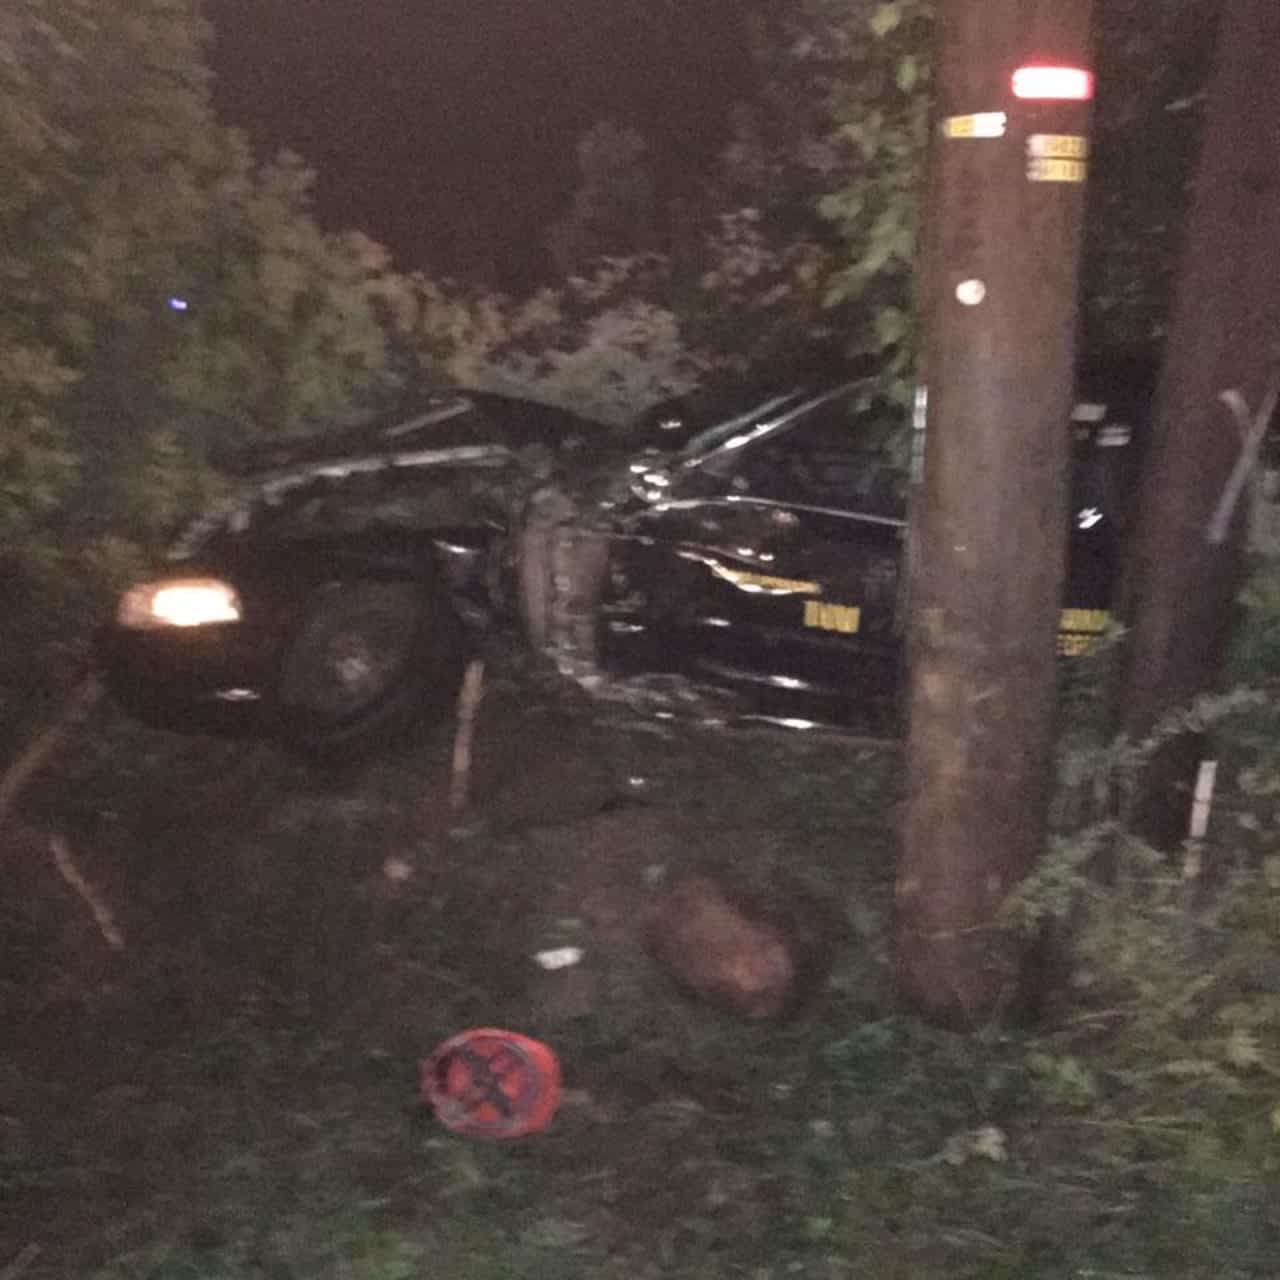 A 58-year-old Airmont man was arrested early Friday after crashing his car into a utility pole on Route 45 near Washington Avenue in Ramapo.